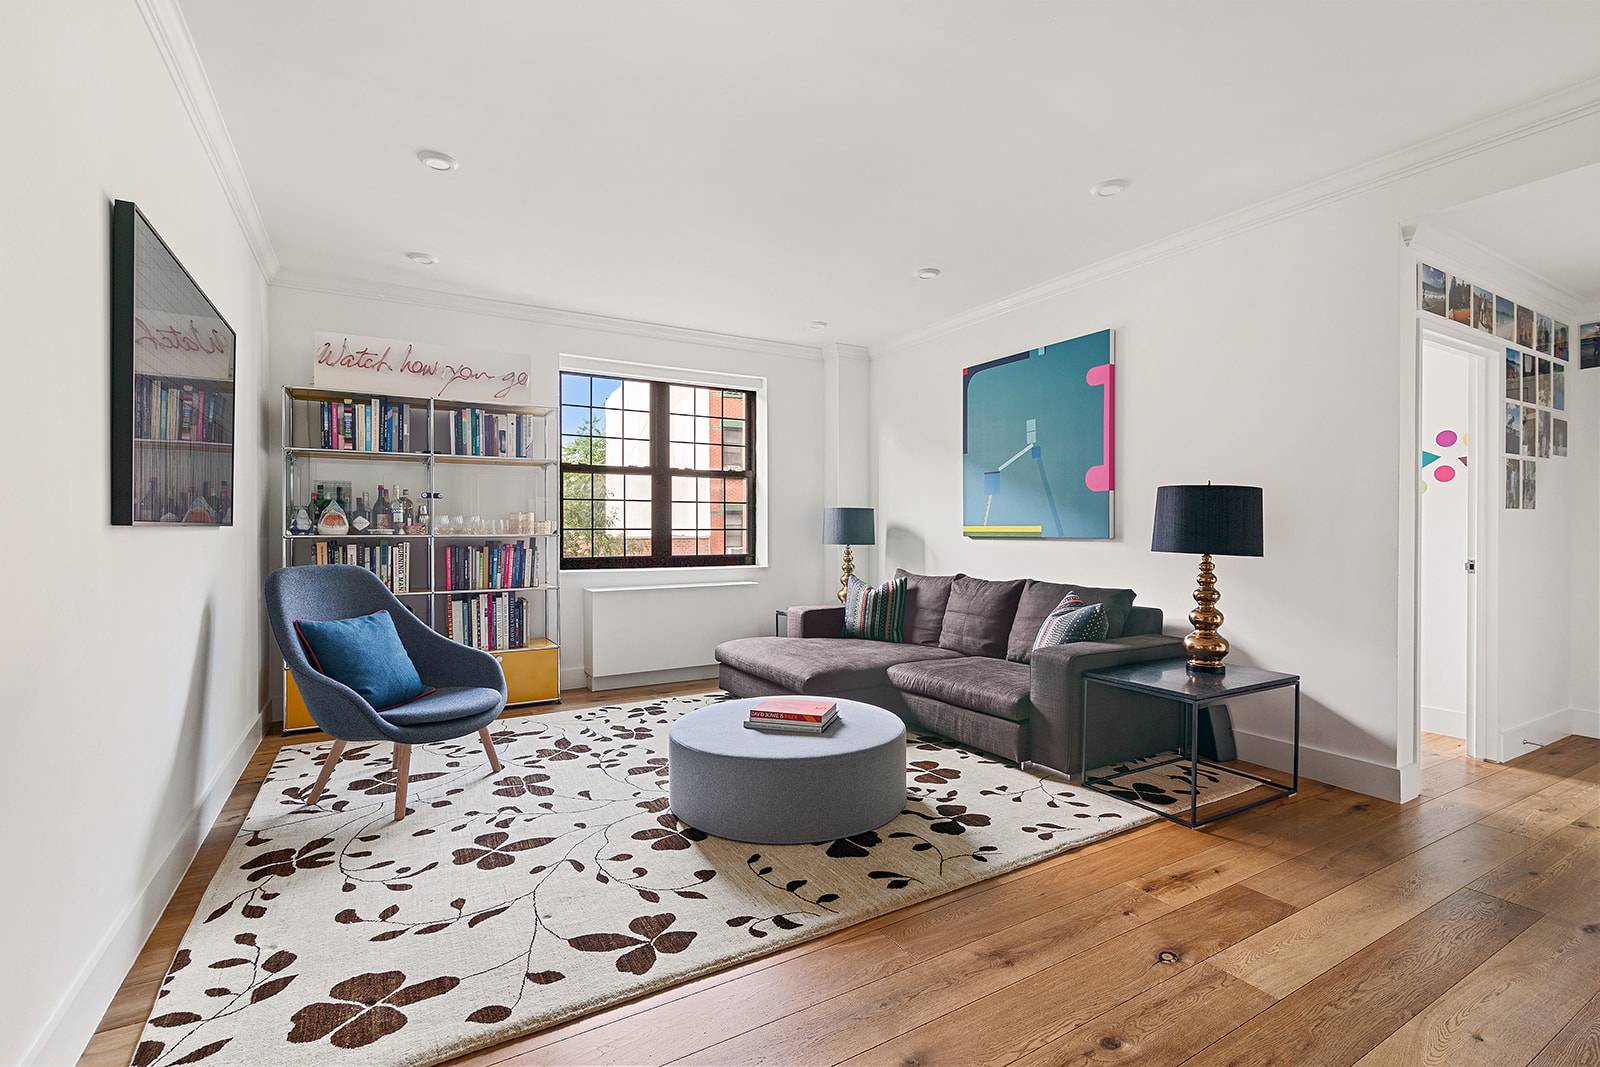 Apartment C202 at the Columbia Commons Condominium is everything you'd expect in a warm yet modern Brooklyn luxury home.